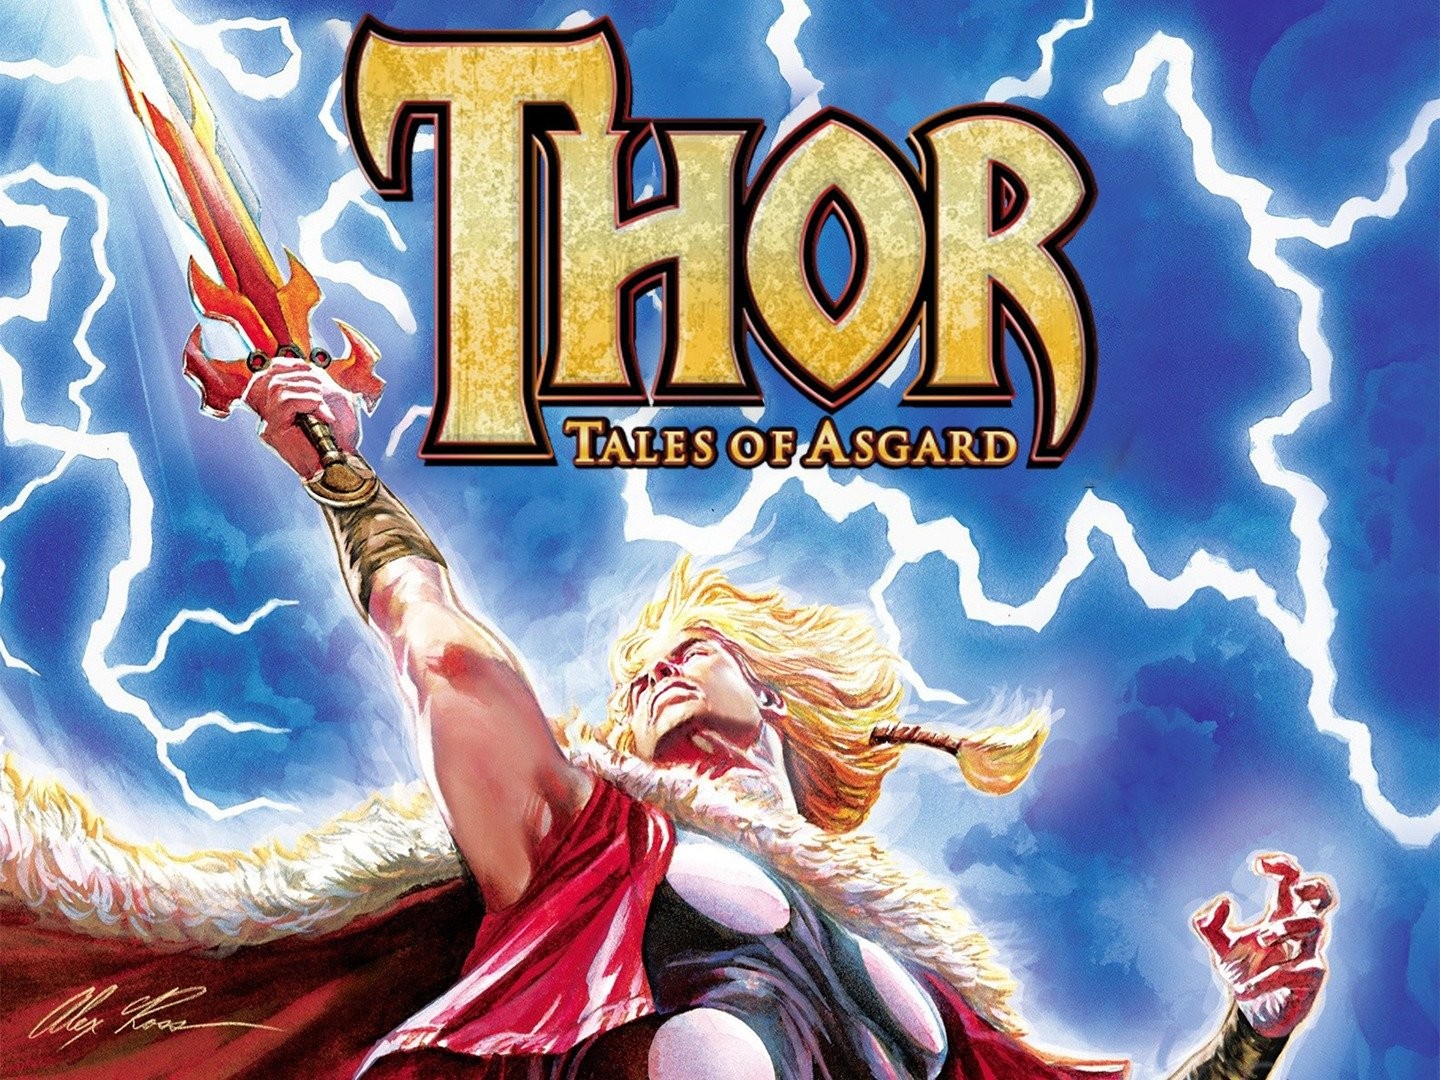 Thor: Tales of Asgard streaming: where to watch online?